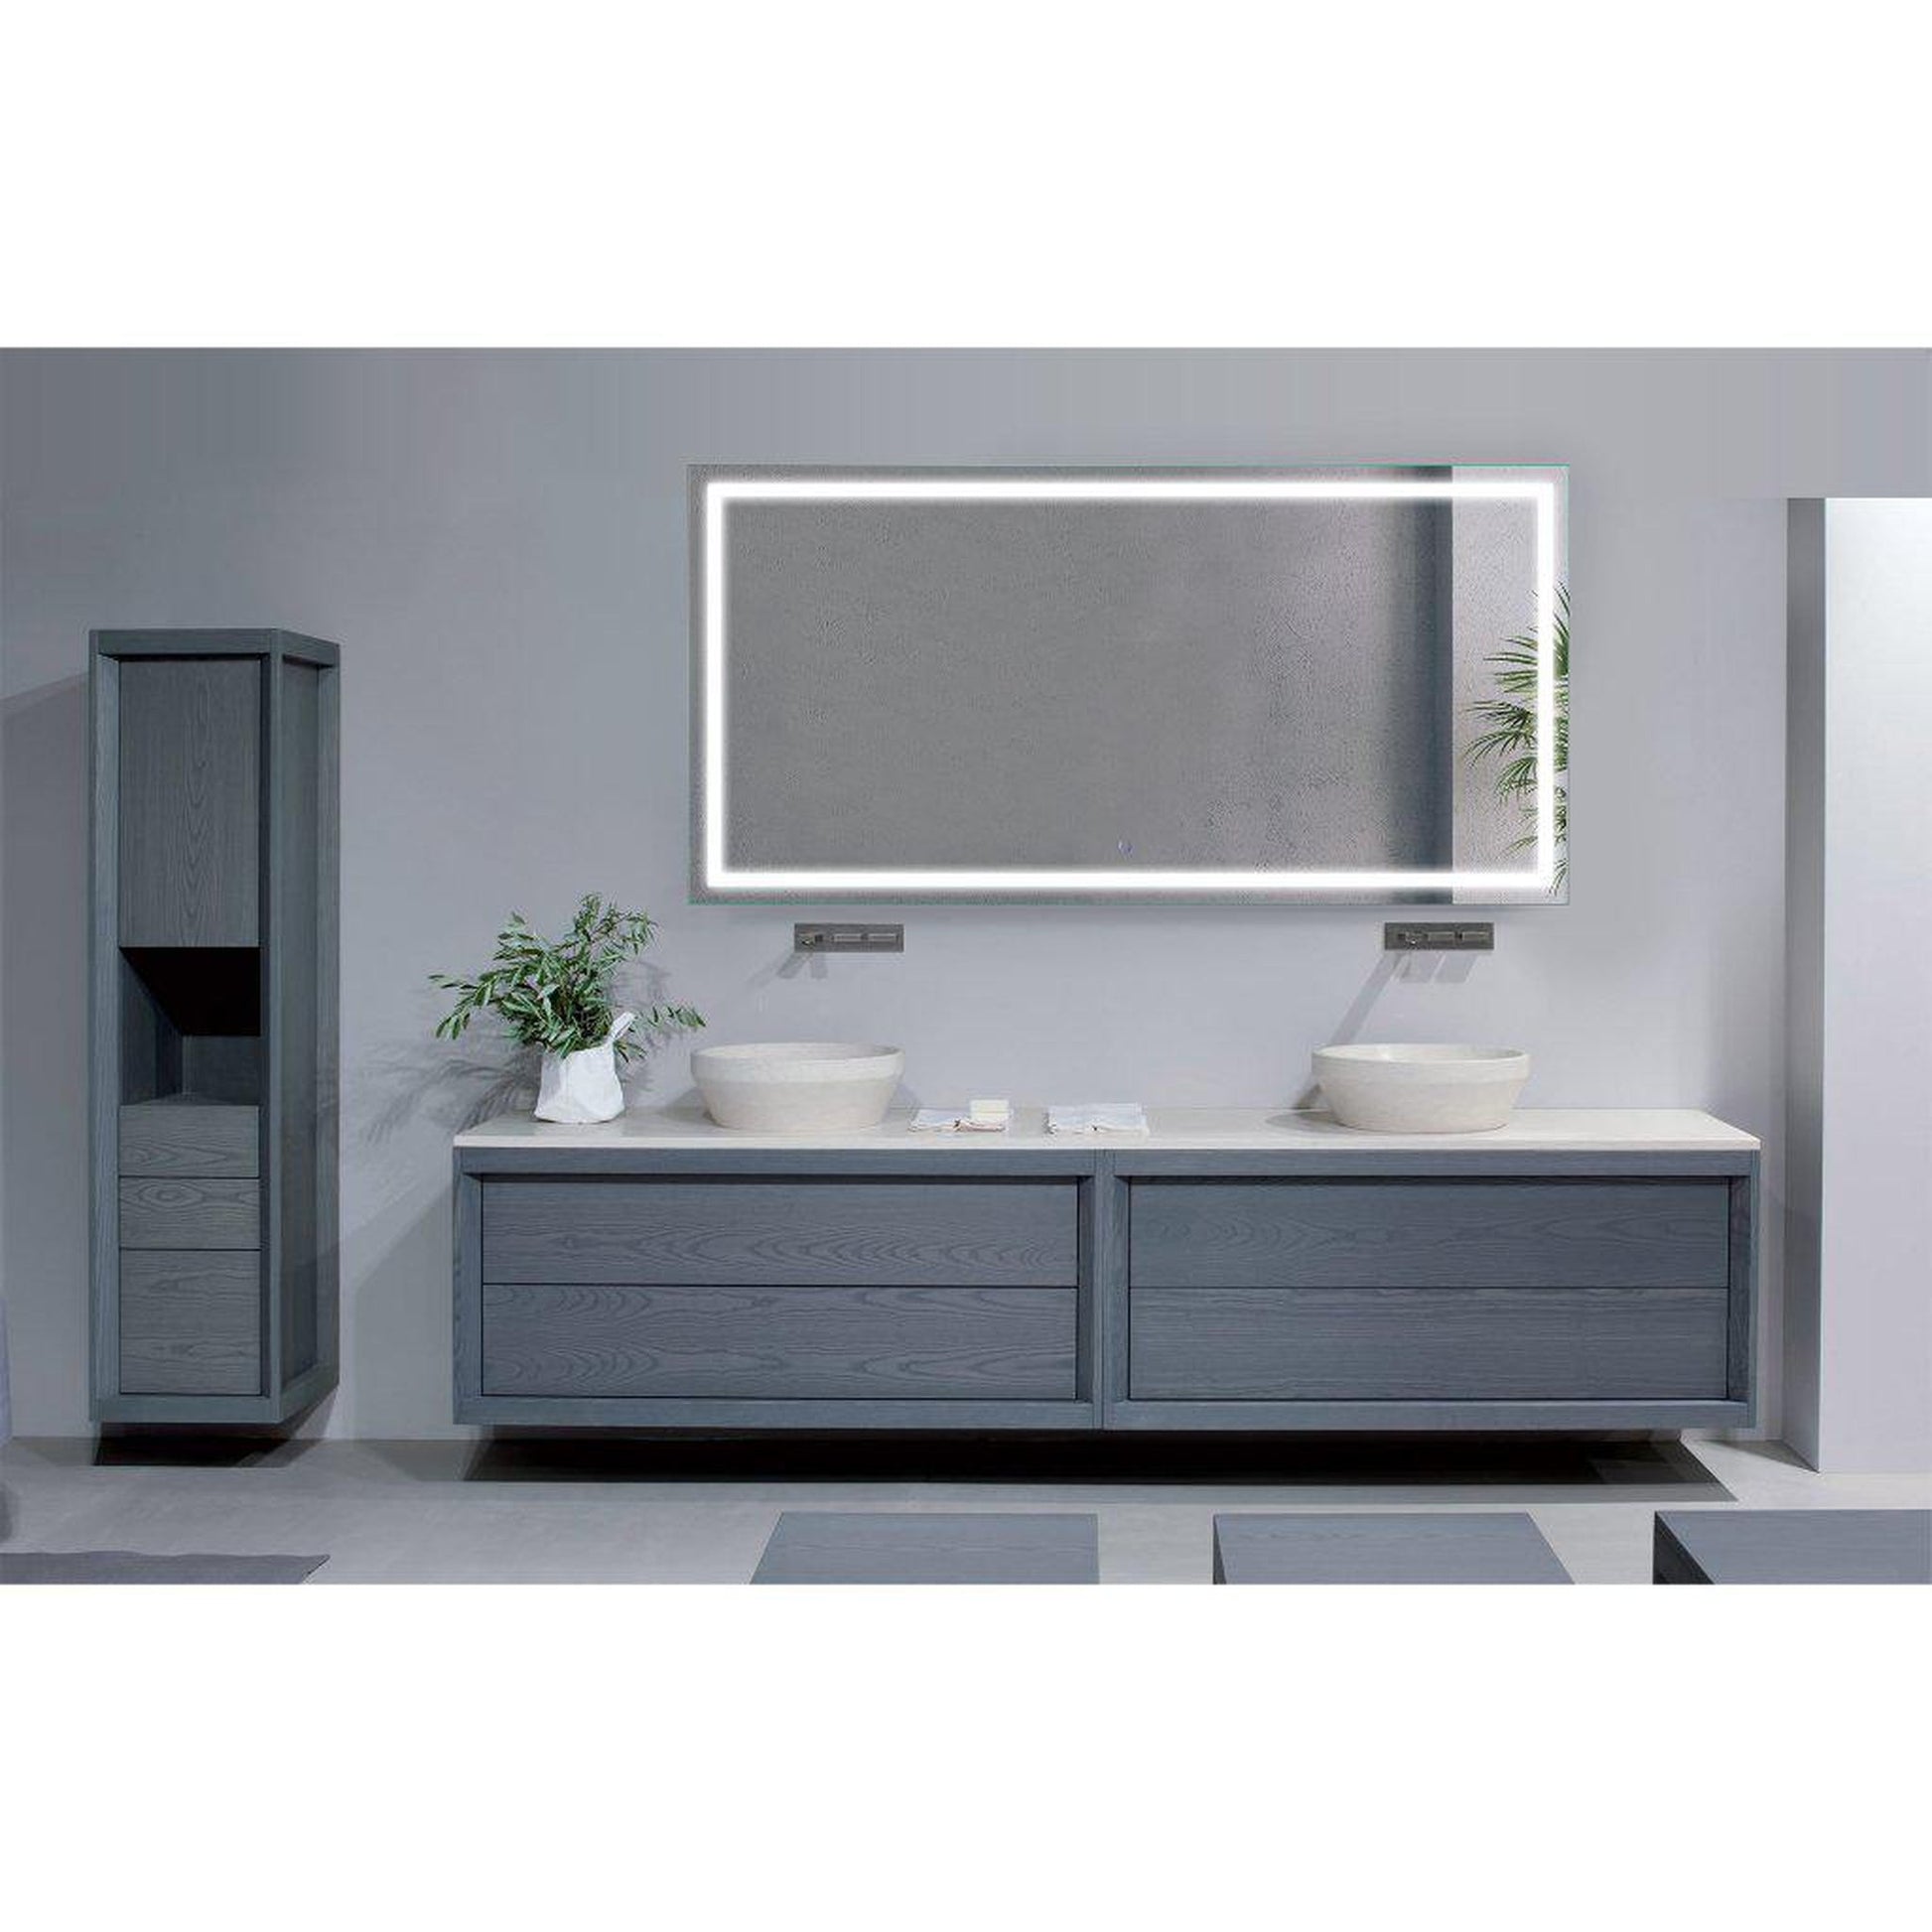 Krugg Reflections Icon 72” x 36” 5000K Rectangular Wall-Mounted Illuminated Silver Backed LED Mirror With Built-in Defogger and Touch Sensor On/Off Built-in Dimmer